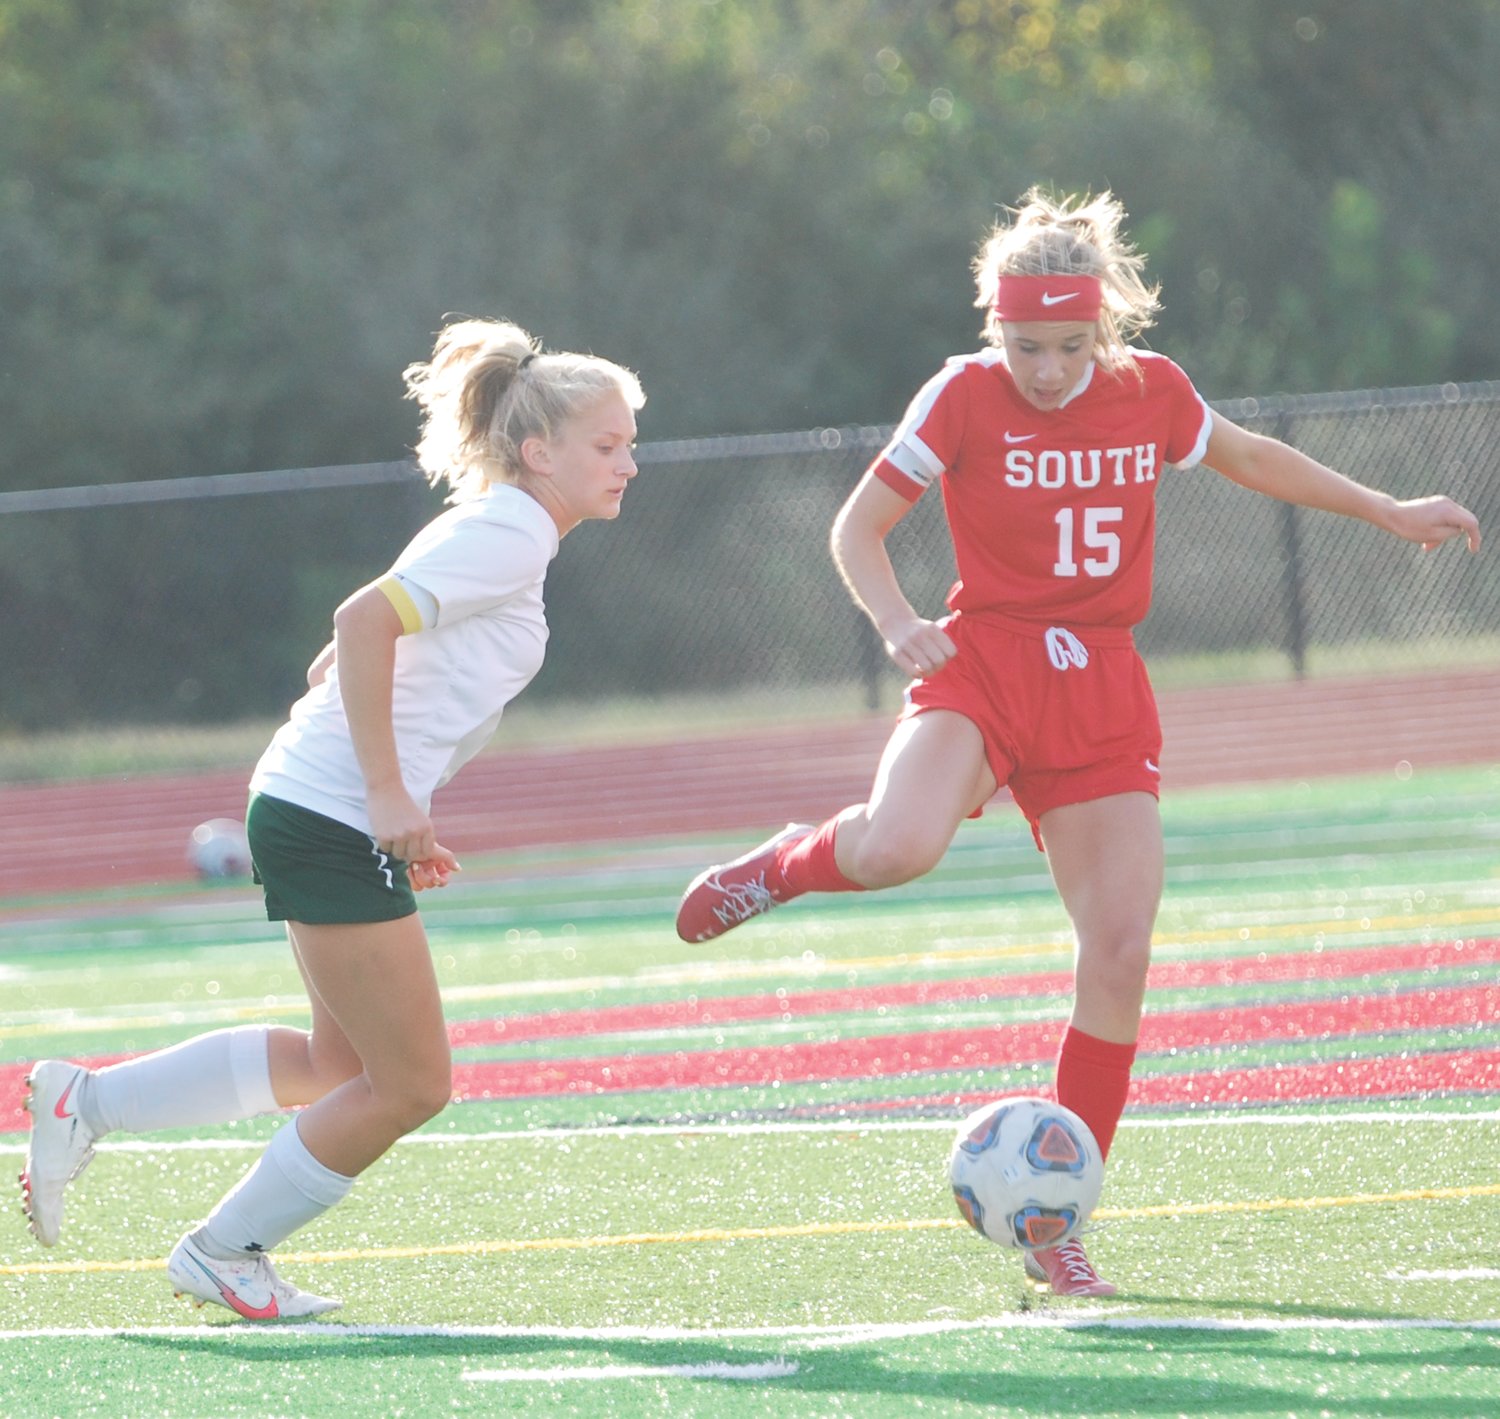 Southmont's Marissa Craig scored the Mounties' lone goal in a 1-1 tie against Benton Central on Tuesday.